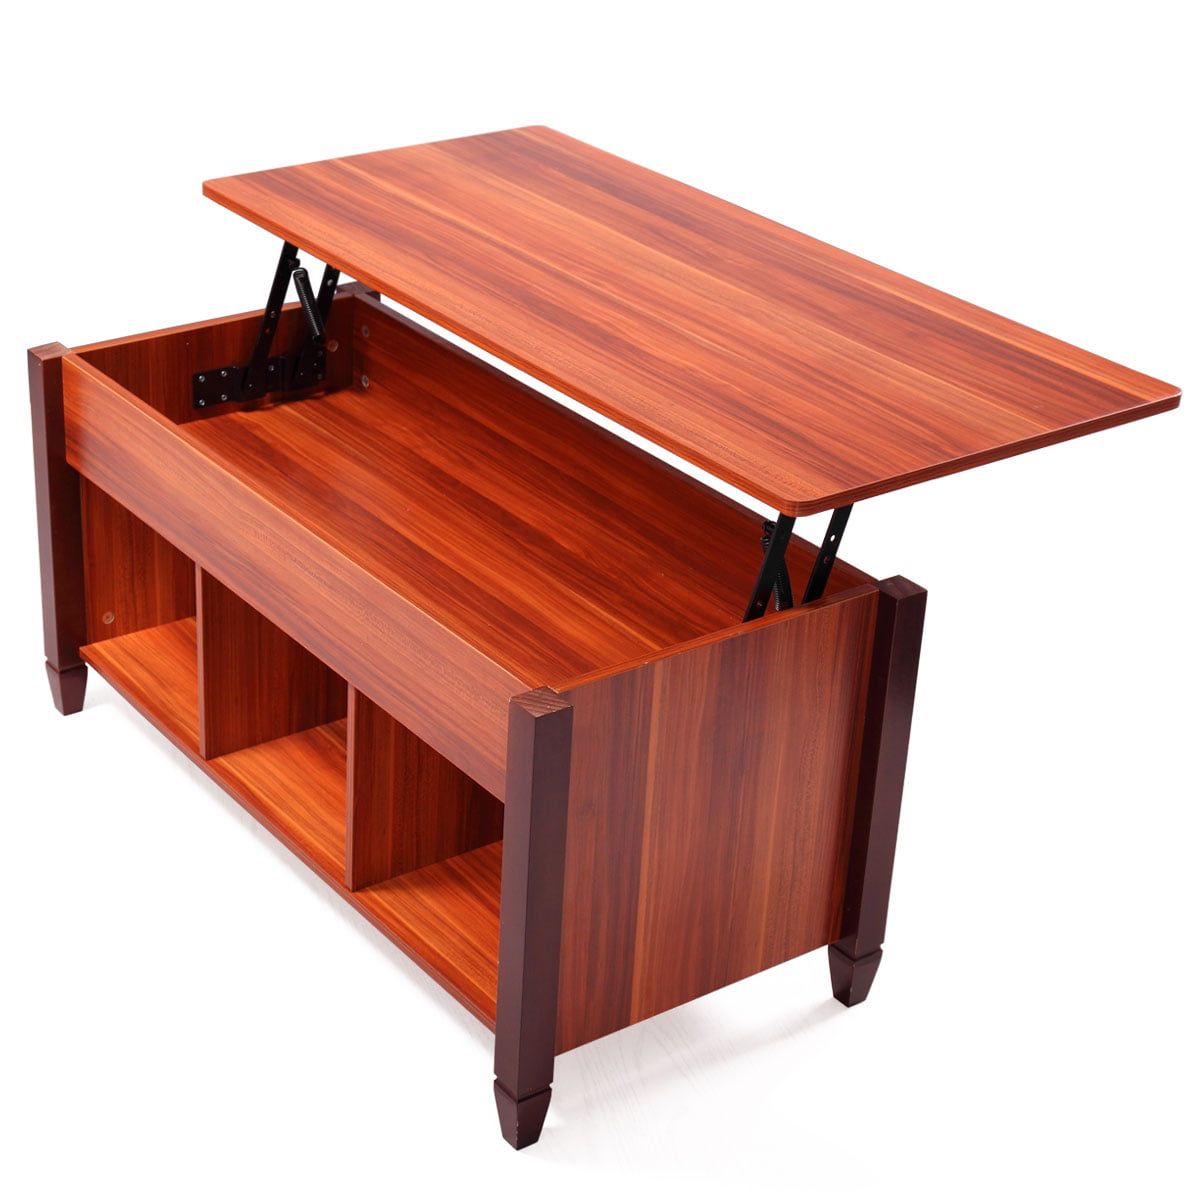 Jaxpety Lift Top Convertible Coffee Table Solid Wood Desk Storage Regarding Wood Lift Top Coffee Tables (Gallery 16 of 20)